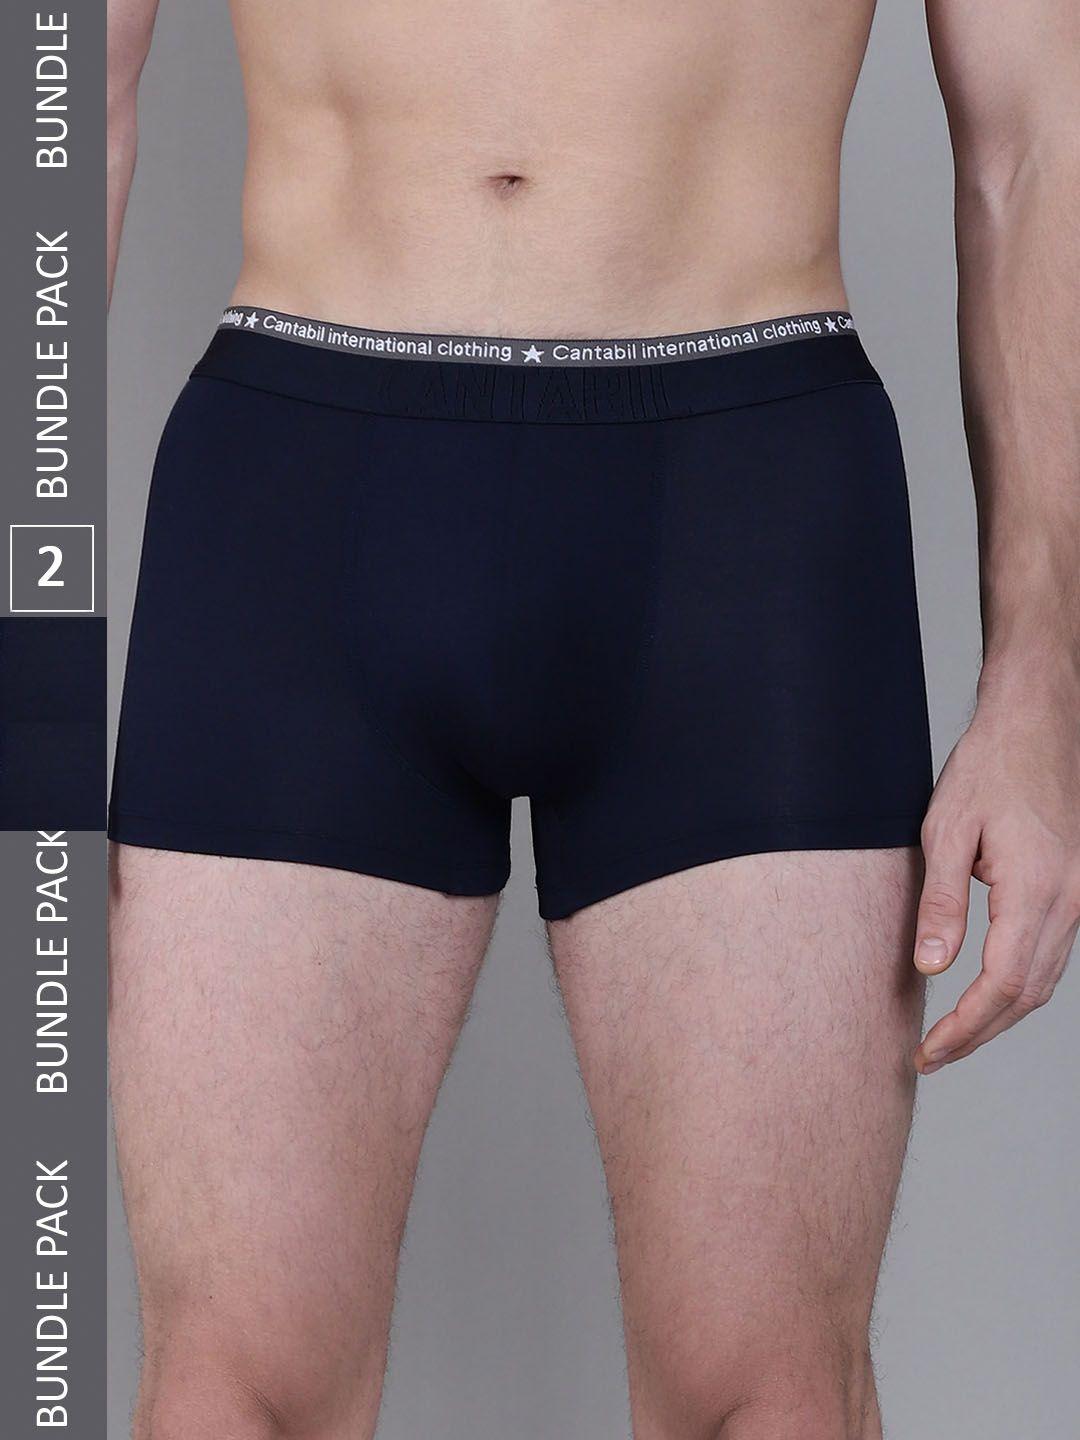 cantabil pack of 2 basic briefs mbrf00026_navy_p2